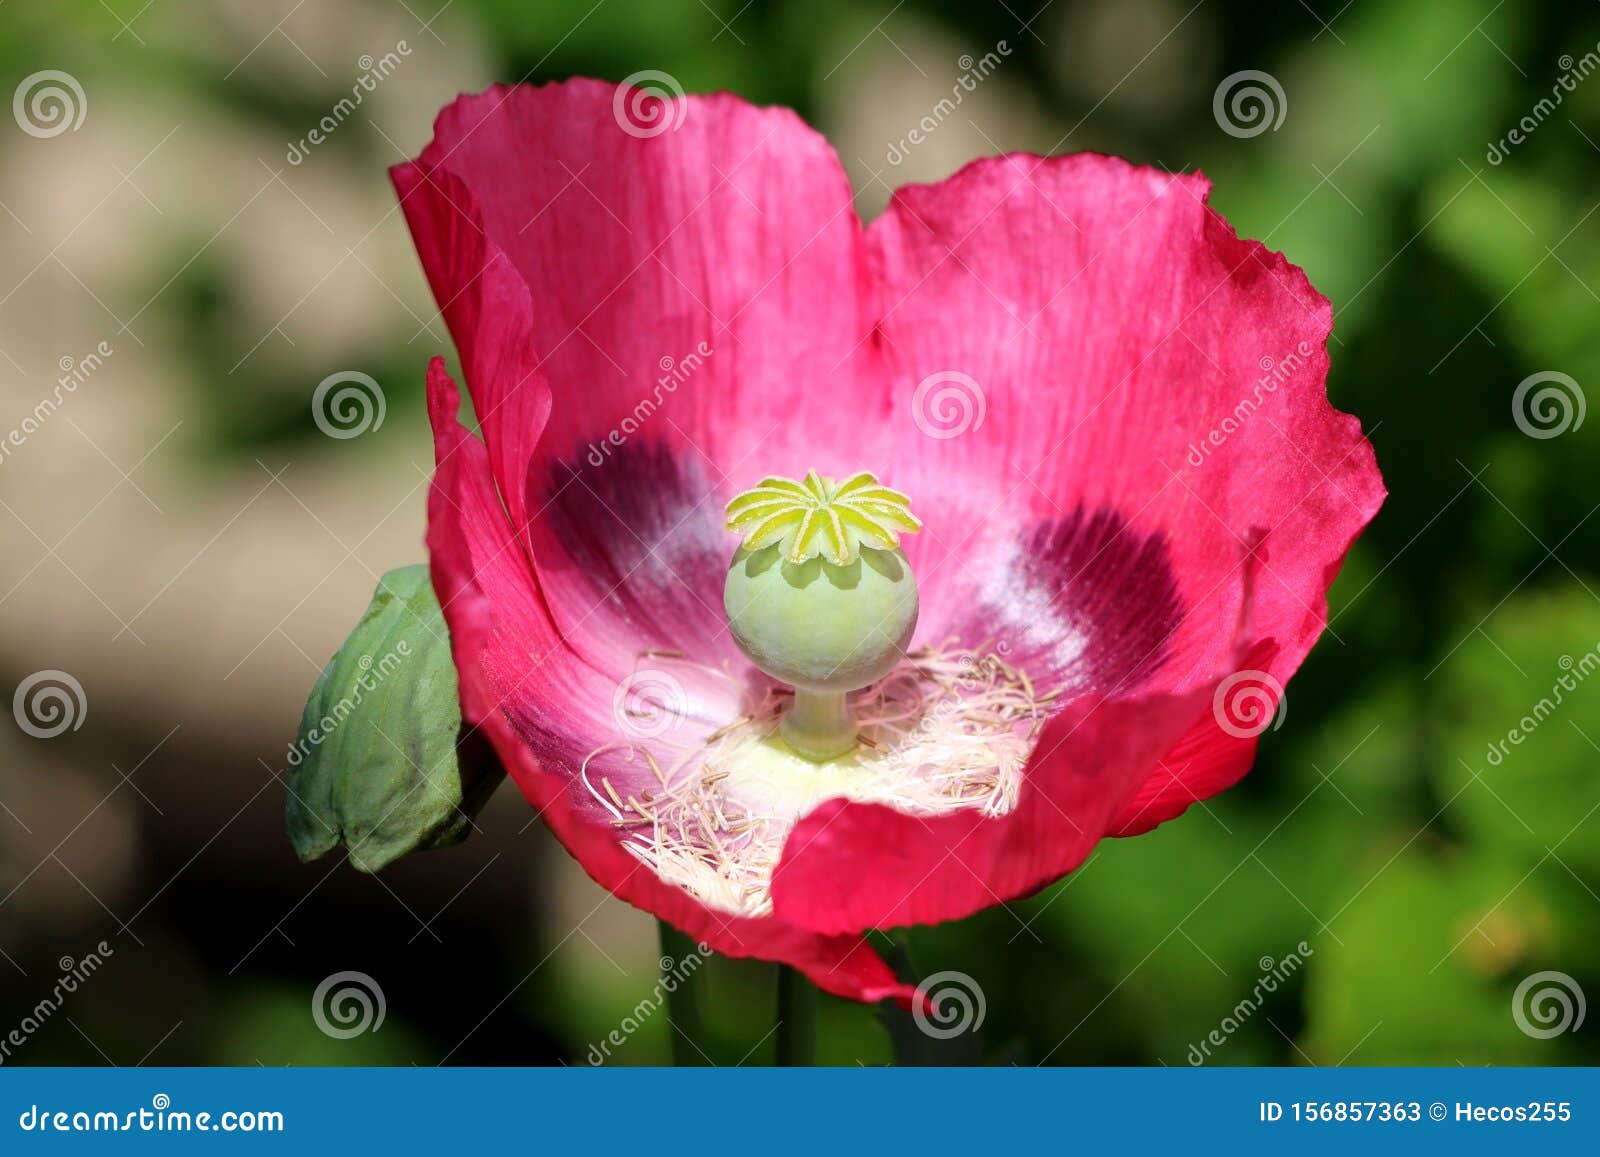 Top View of Opium Poppy or Papaver Somniferum Plant with Open Red Flower  and Green Center Made of Rounded Capsule and Radiating Stock Image - Image  of radiating, annual: 156857363